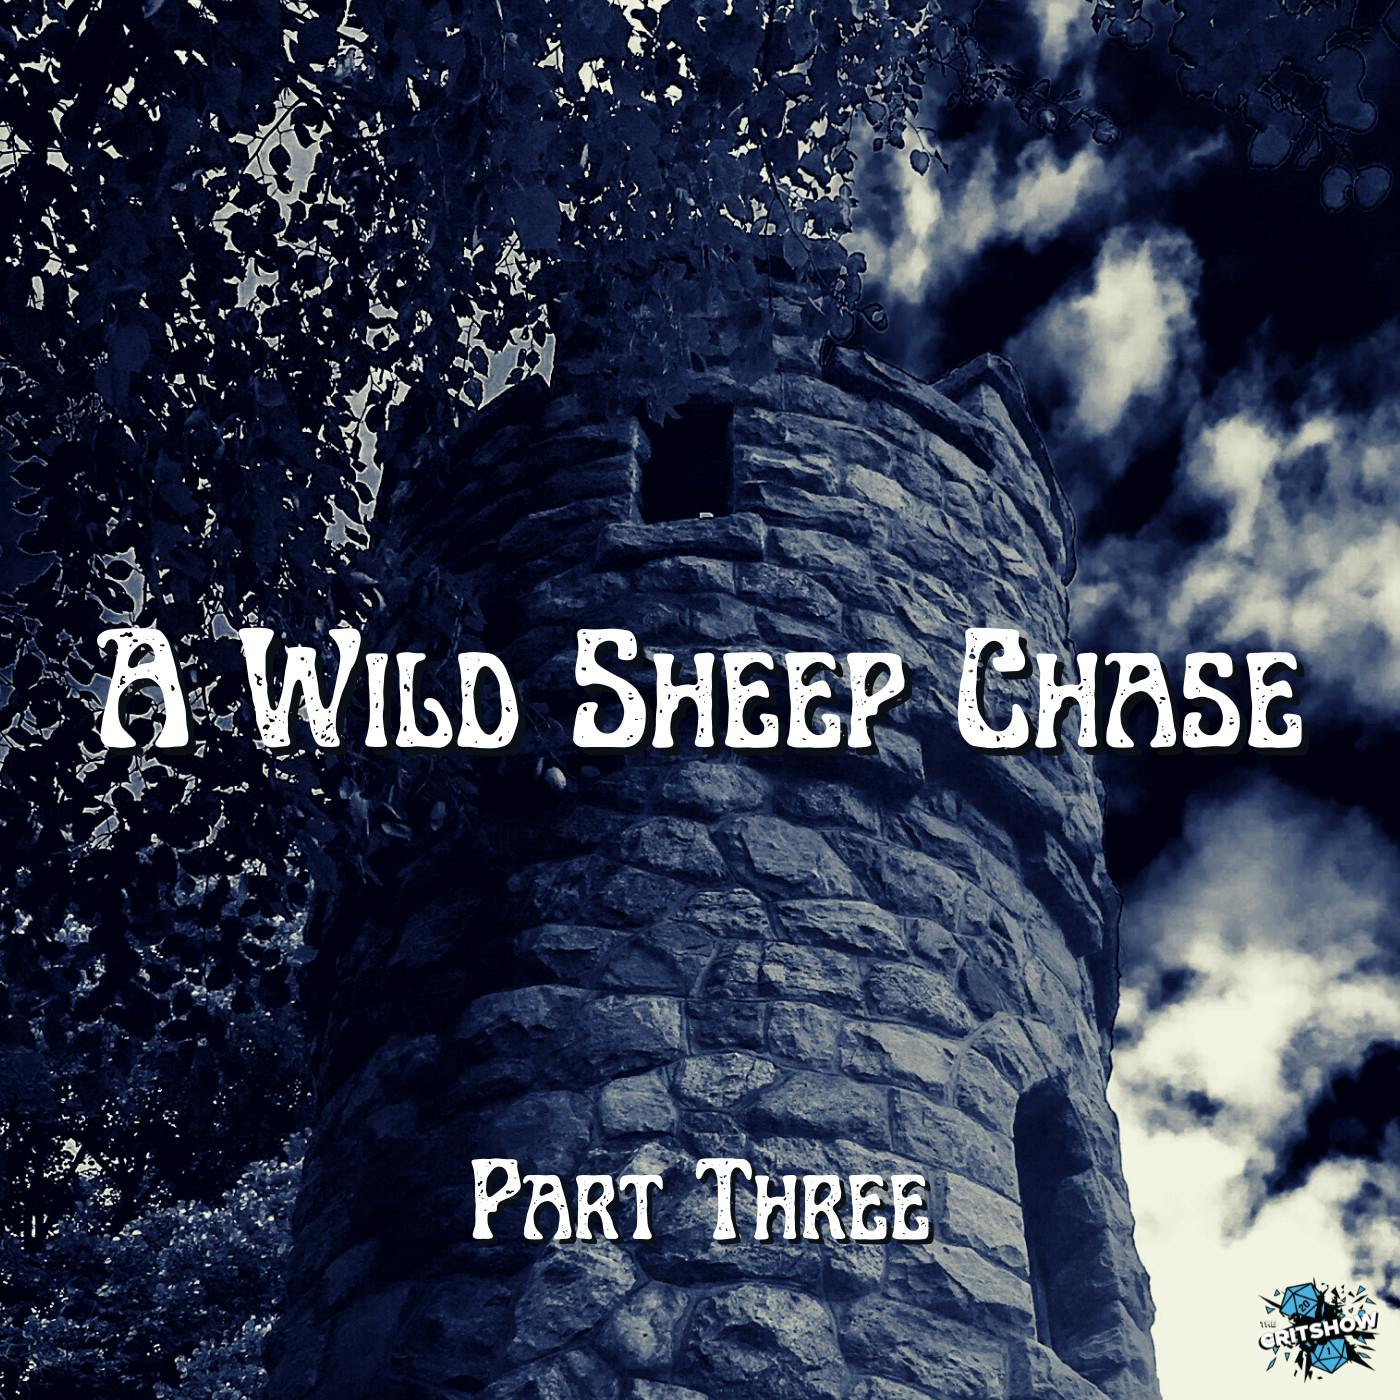 The Critshow: A Wild Sheep Chase (Part 3)